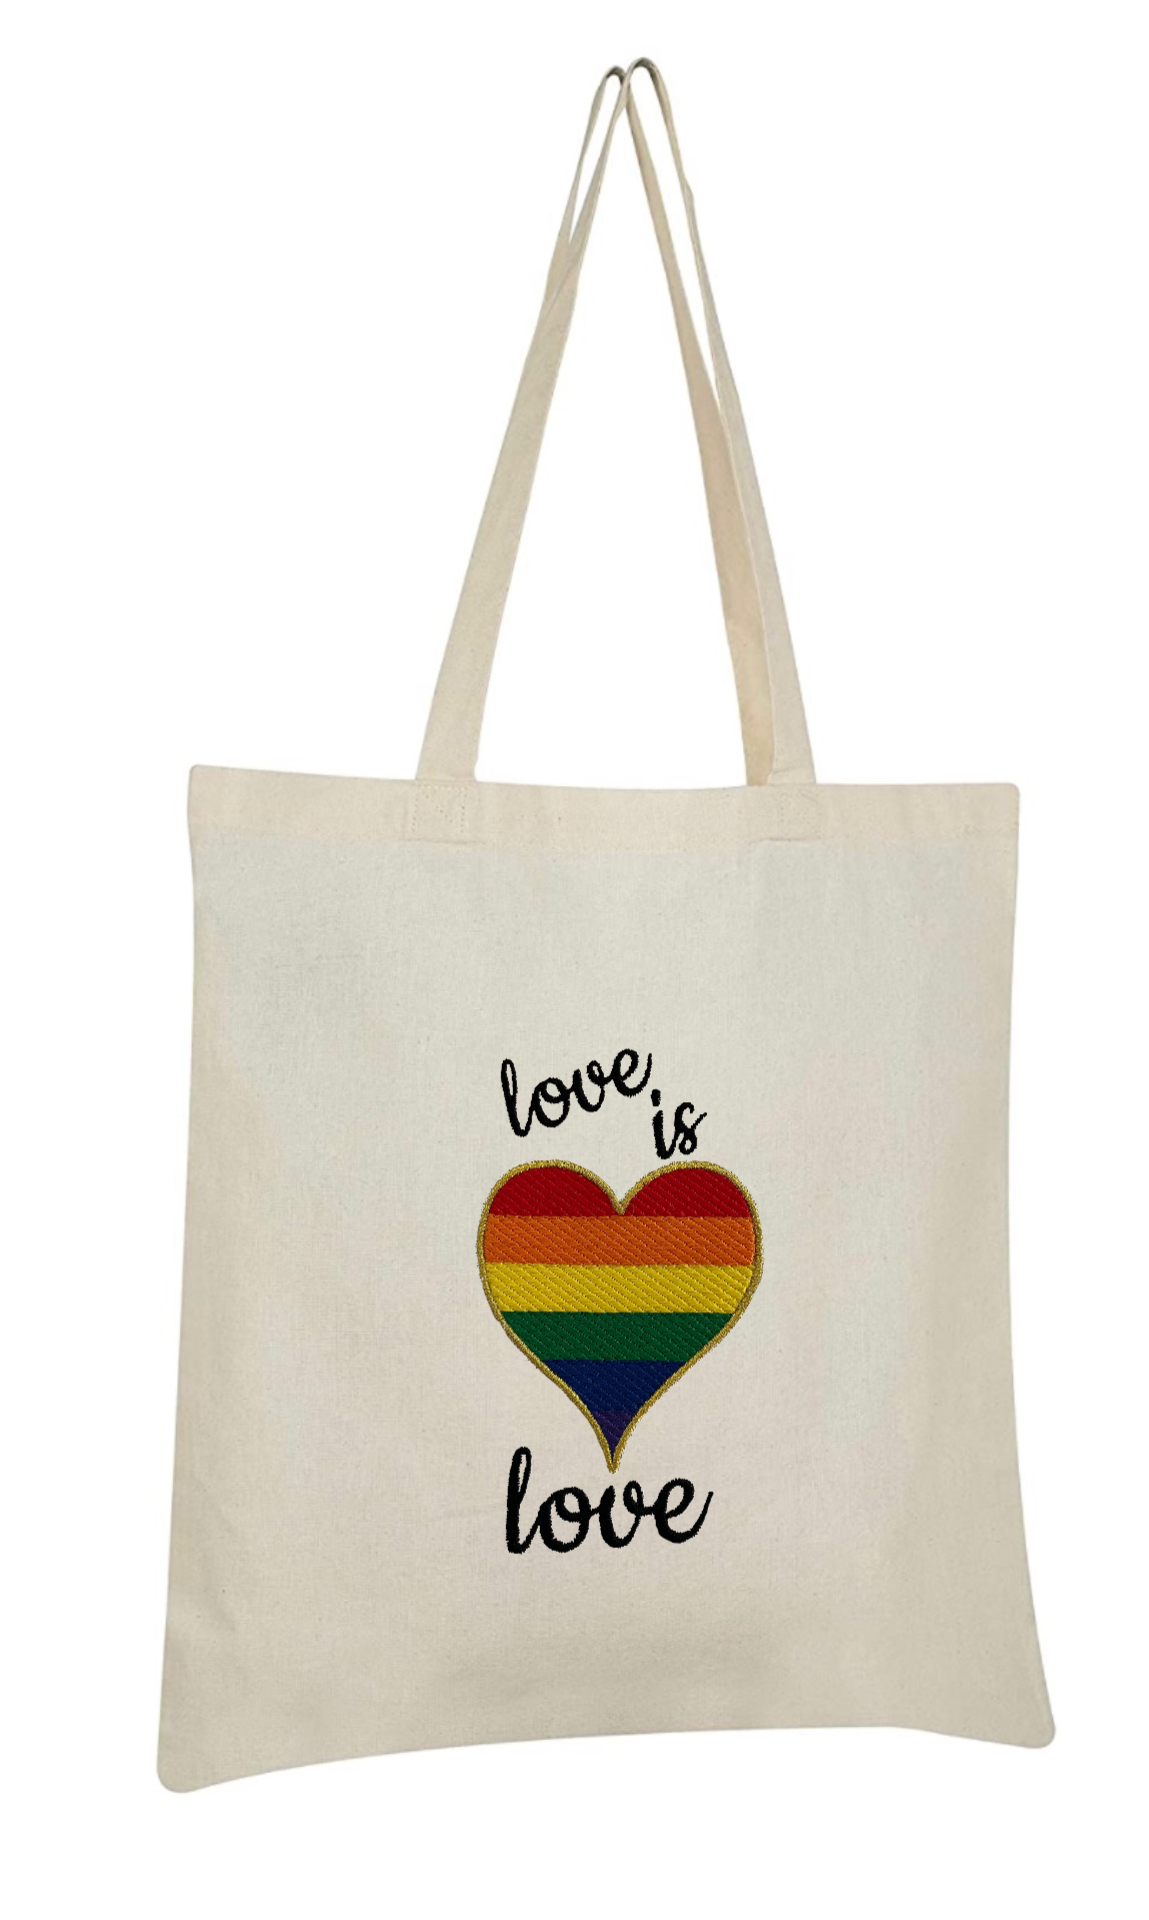 Our elusive PRIDE bags are individually hand-painted with love. No